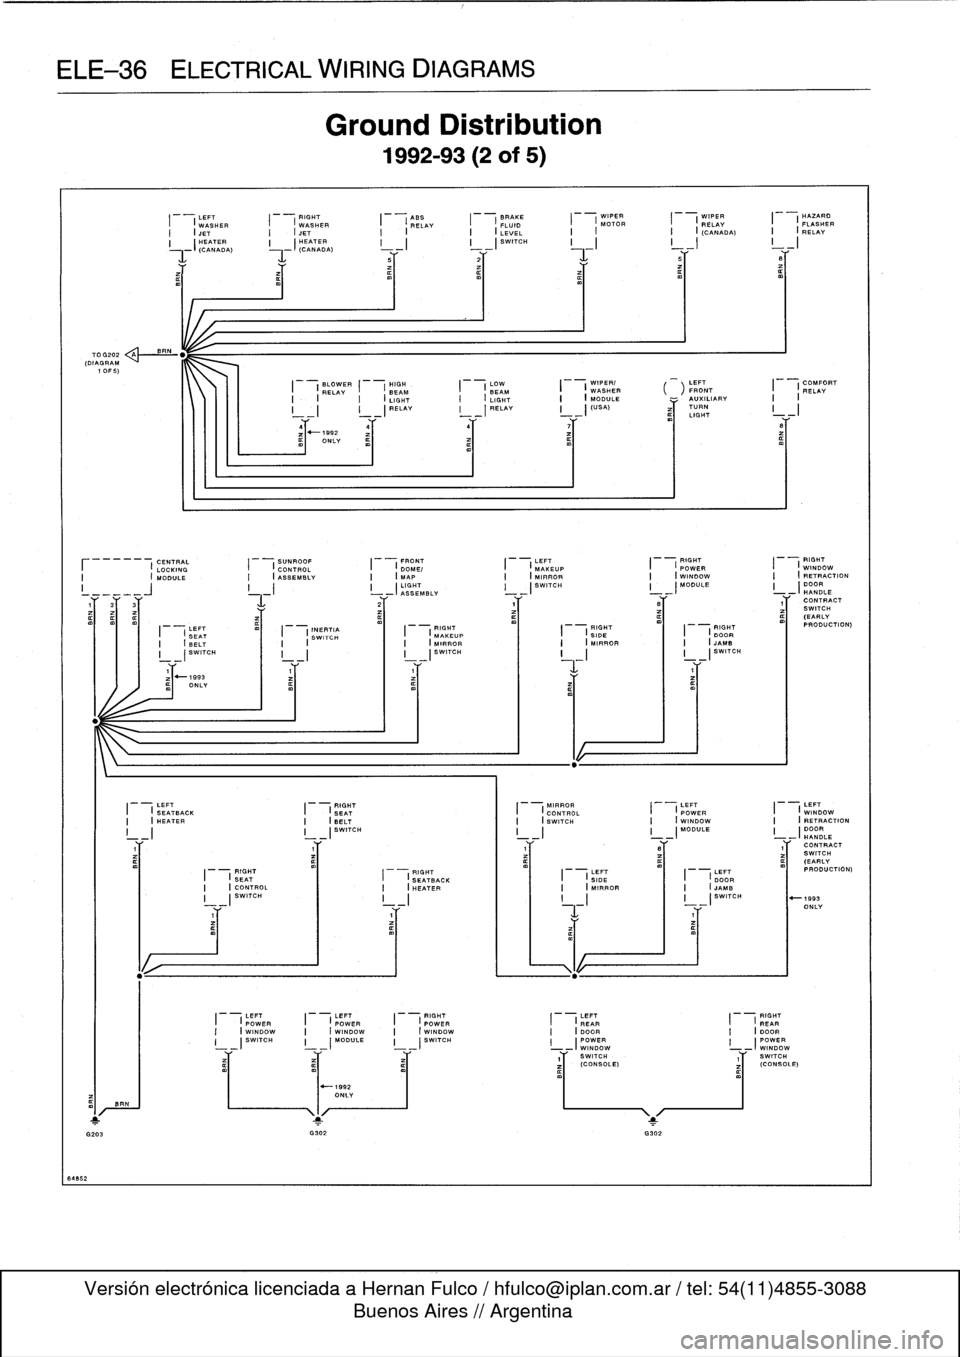 BMW 323i 1993 E36 Owners Manual 
ELE-36
ELECTRICAL
WIRING
DIAGRAMS

64852

70G202
(DIAGRAM
1
OF
5)

BR

BRN

LEFT

	

RIGHT

	

ASS

	

BRAKE

	

WIPER

	

WIPER

	

HAZARD
I

	

(
WASHER

	

I

	

(
WASHER

	

I

	

(
RELAY

	

I

